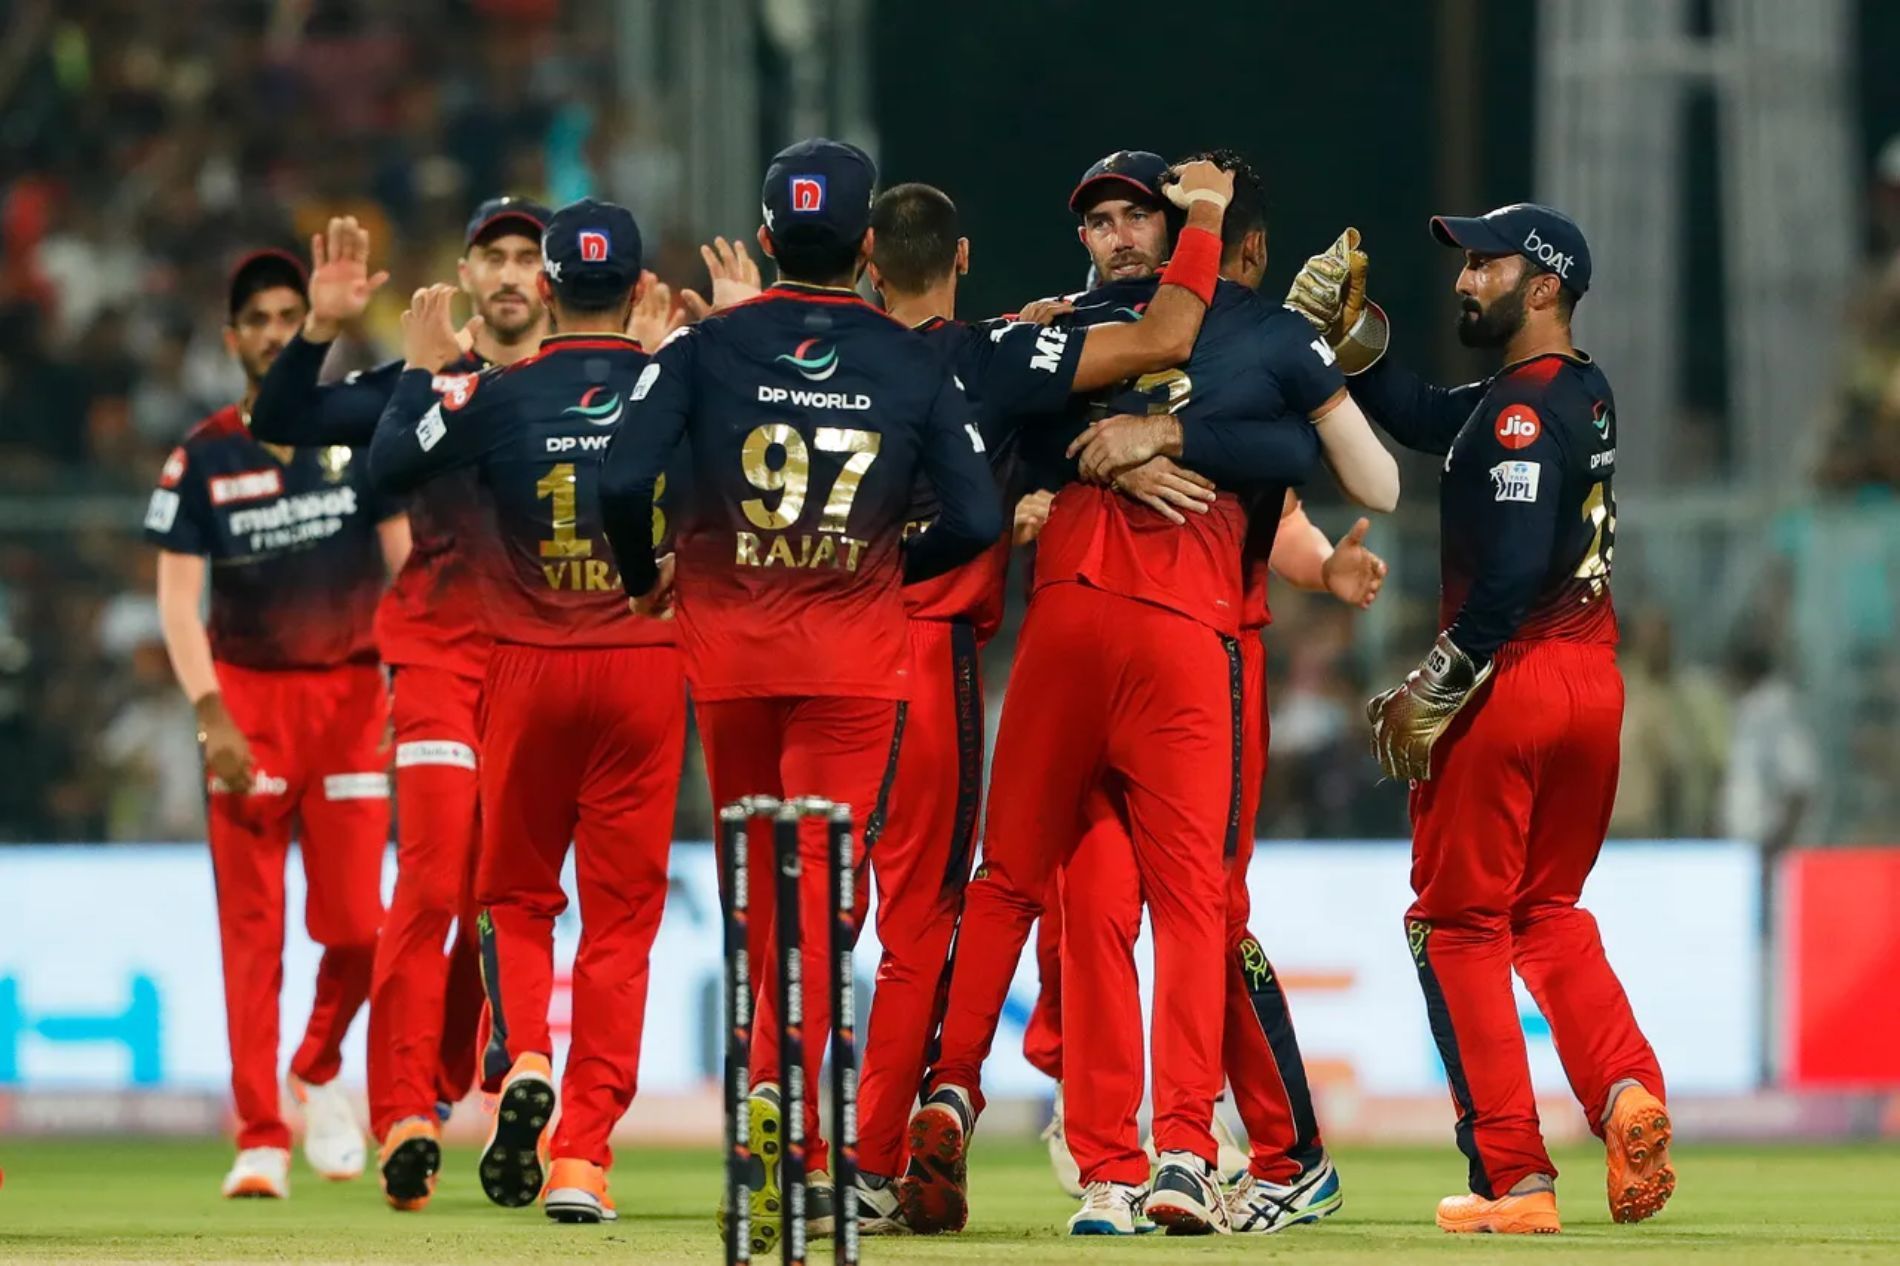 Royal Challengers Bangalore celebrate a wicket against Lucknow. Pic: IPLT20.COM